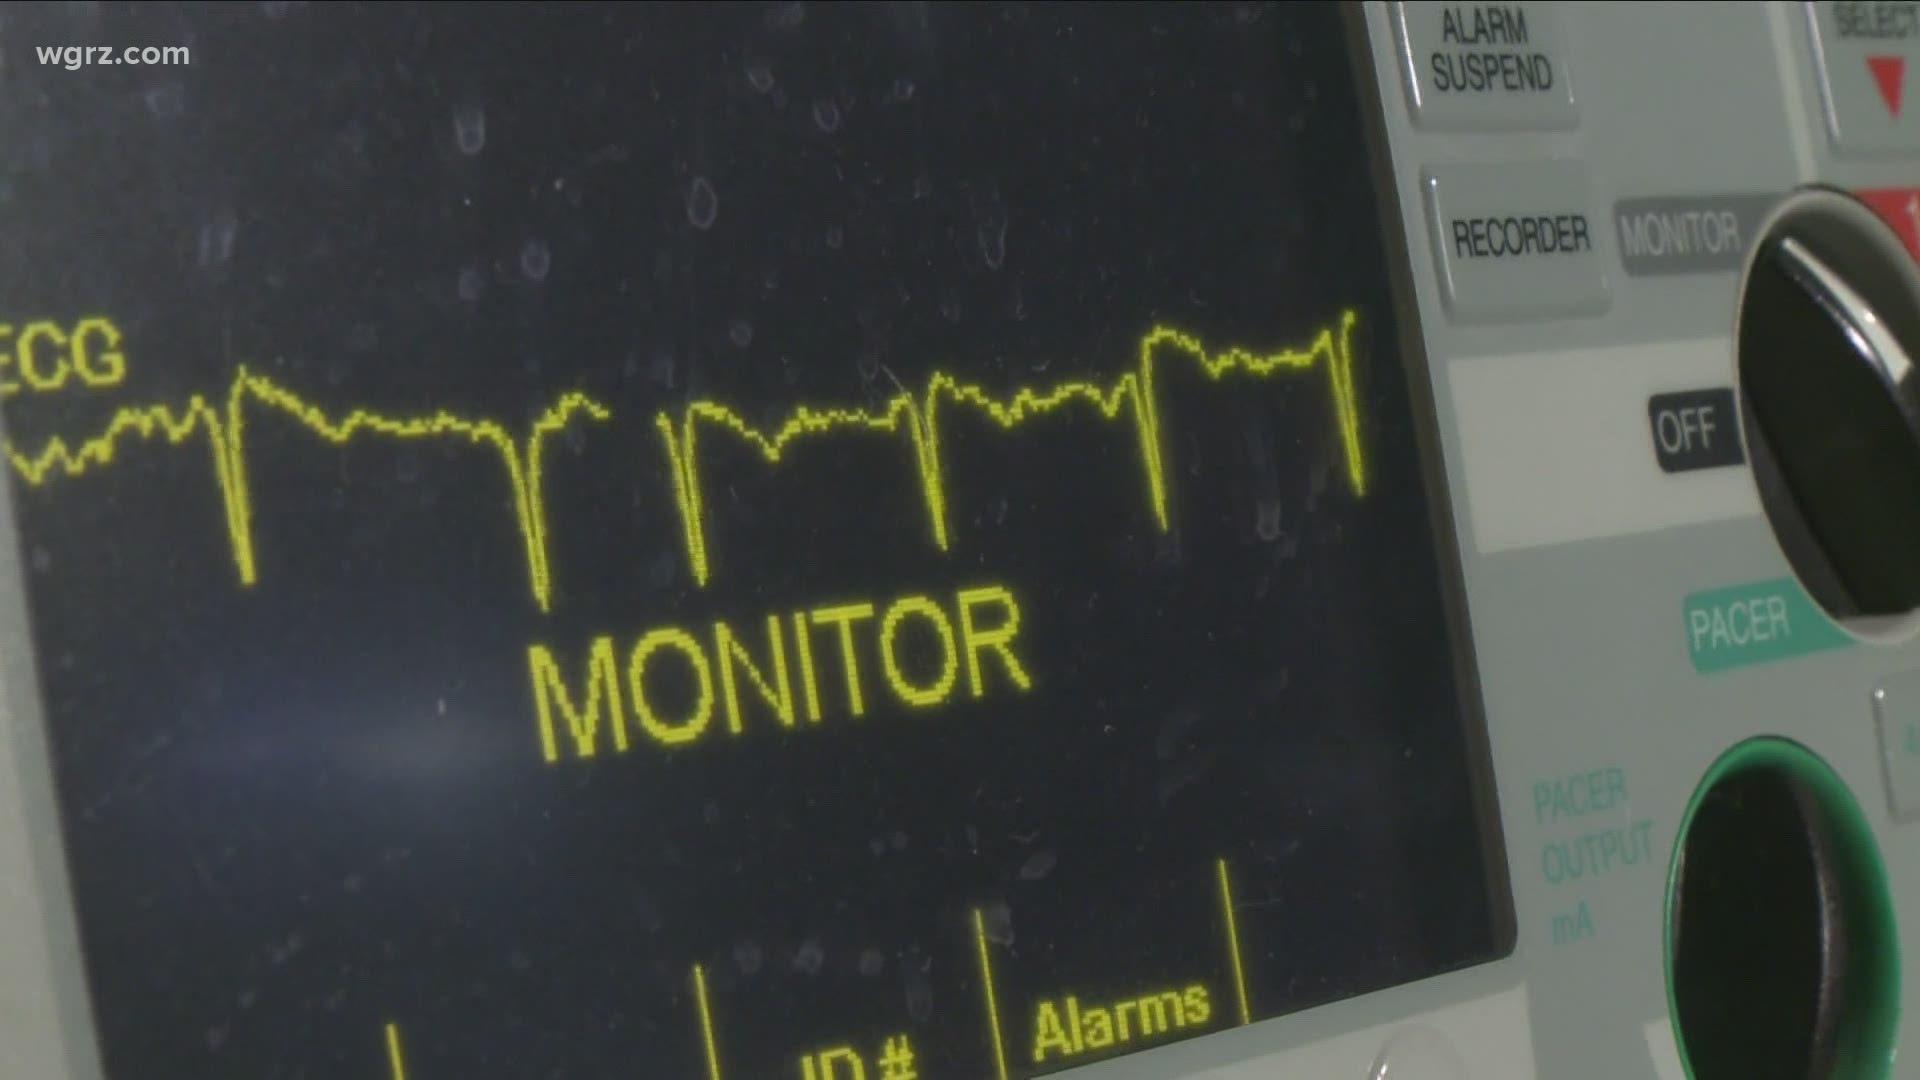 Tonight we wanted to take a closer look at how our local hospitals are feeling the impact.